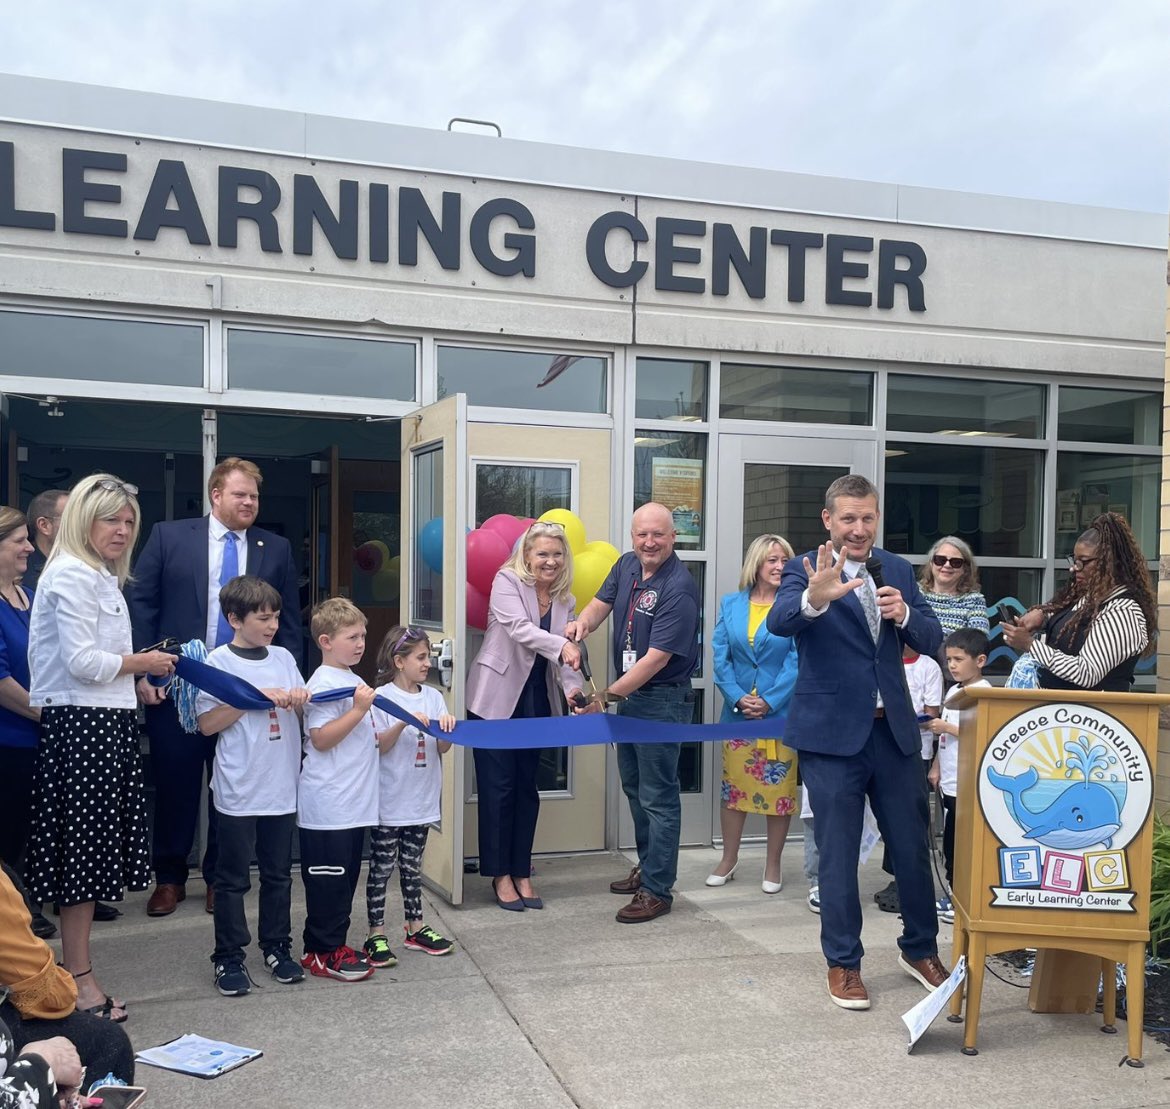 Official Ribbon Cutting Ceremony 🎉So proud of our Student Lighthouse Team! @GreeceELC is an awesome place to be ❤️ @GreeceCentral @GCSDsuper @valerie_paine @mikejferris2 @JulieParsons203